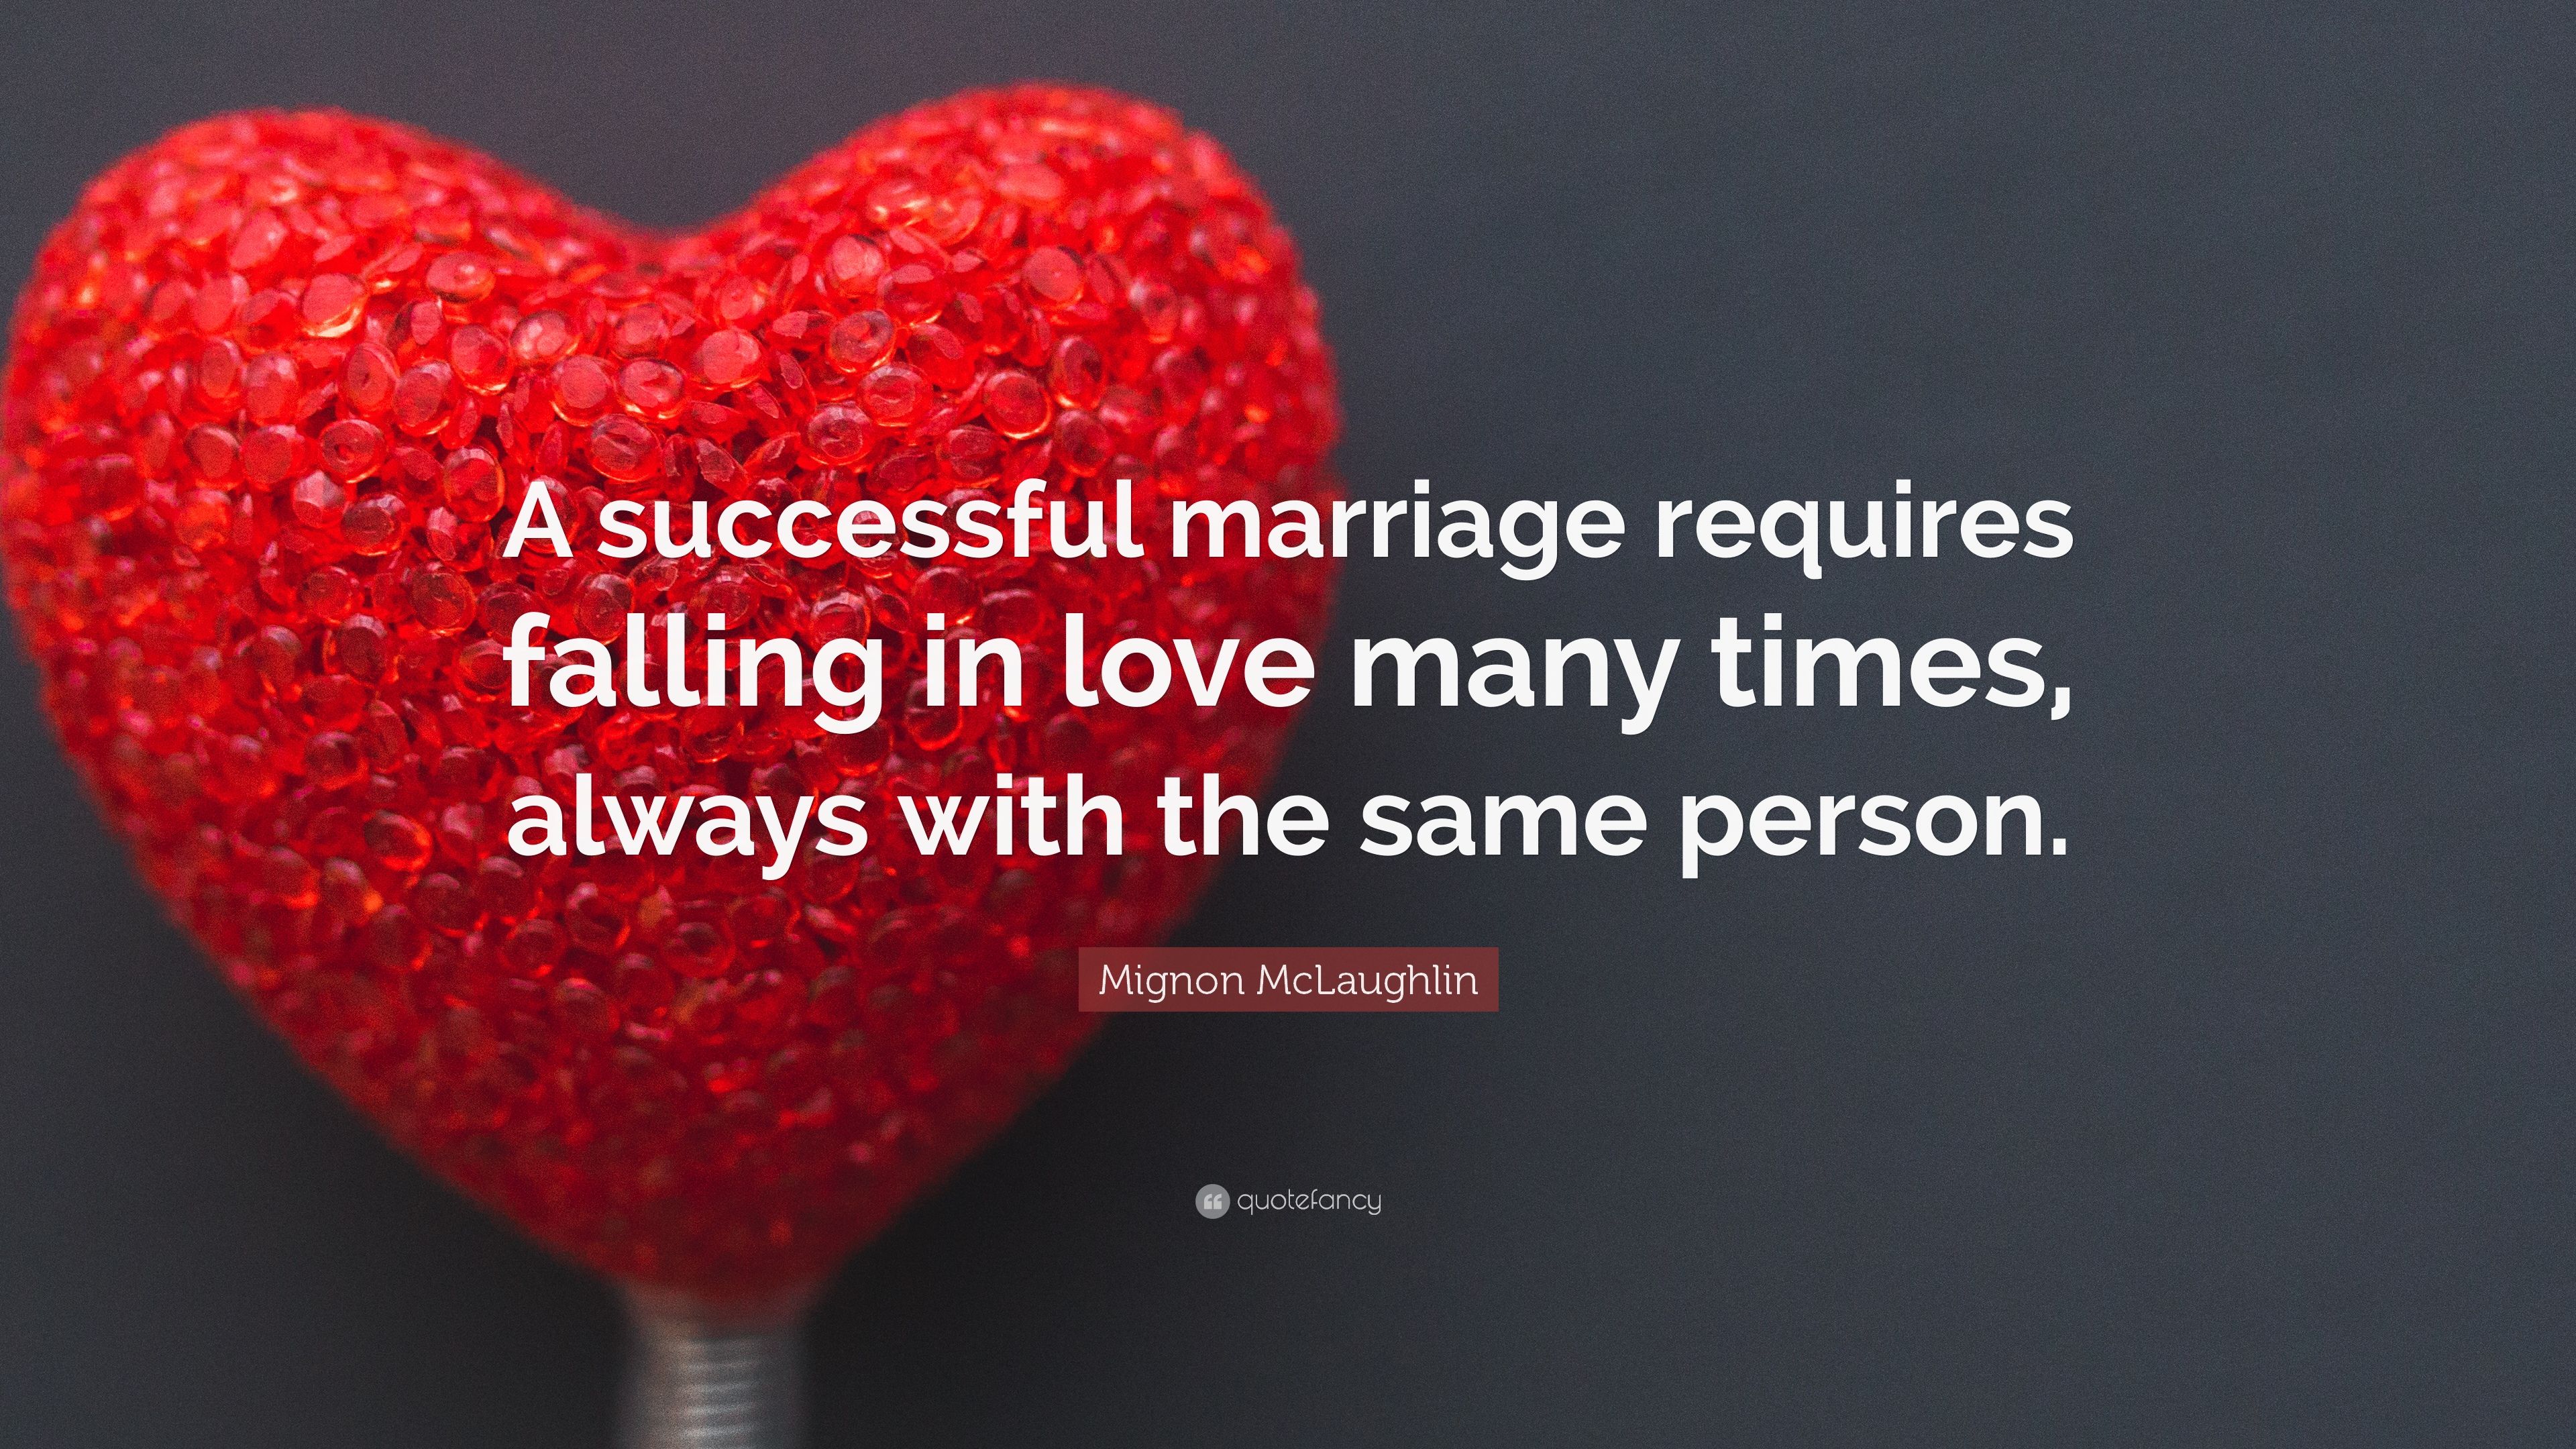 Mignon McLaughlin Quote: “A successful marriage requires falling